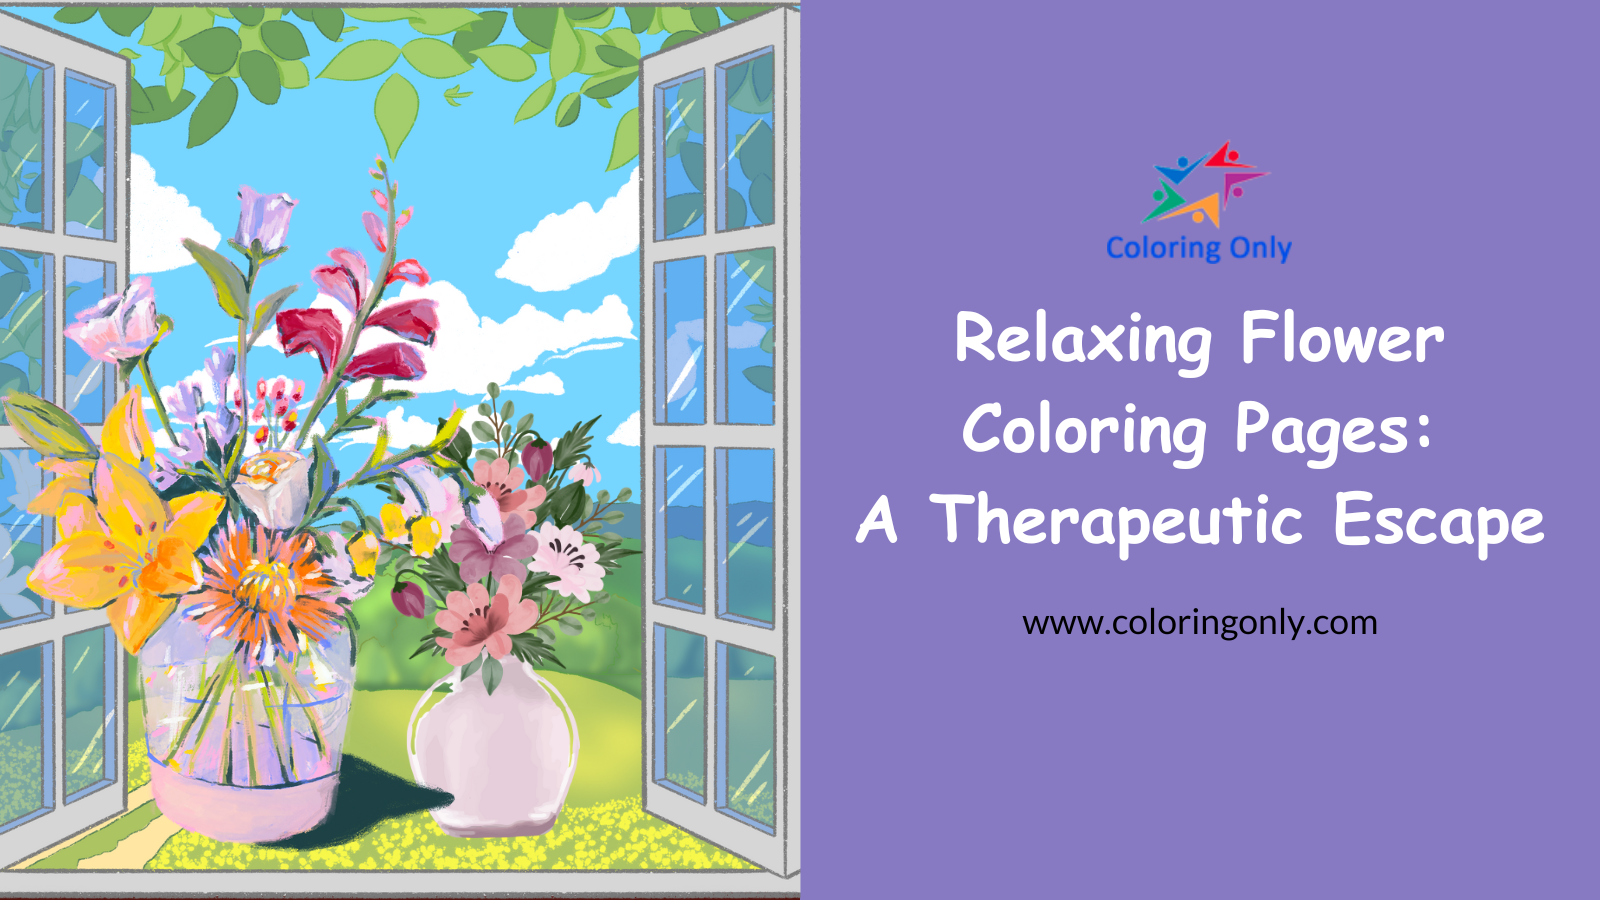 Relaxing Flower Coloring Pages: A Therapeutic Escape